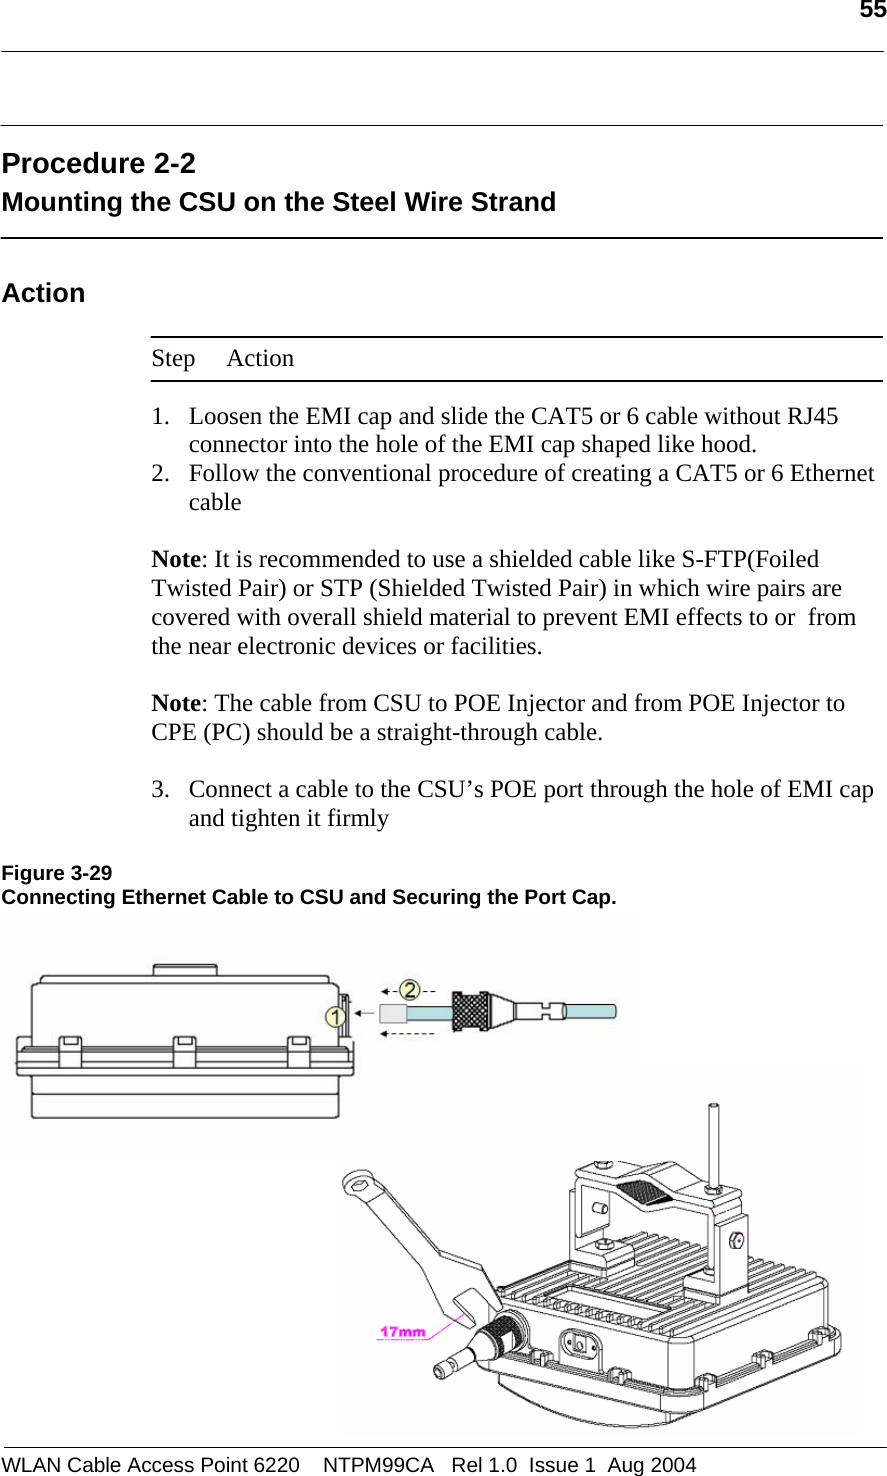   55   Procedure 2-2 Mounting the CSU on the Steel Wire Strand  Action  Step Action  1. Loosen the EMI cap and slide the CAT5 or 6 cable without RJ45 connector into the hole of the EMI cap shaped like hood. 2. Follow the conventional procedure of creating a CAT5 or 6 Ethernet cable   Note: It is recommended to use a shielded cable like S-FTP(Foiled Twisted Pair) or STP (Shielded Twisted Pair) in which wire pairs are covered with overall shield material to prevent EMI effects to or  from the near electronic devices or facilities.    Note: The cable from CSU to POE Injector and from POE Injector to CPE (PC) should be a straight-through cable.   3. Connect a cable to the CSU’s POE port through the hole of EMI cap and tighten it firmly  Figure 3-29 Connecting Ethernet Cable to CSU and Securing the Port Cap.            WLAN Cable Access Point 6220    NTPM99CA   Rel 1.0  Issue 1  Aug 2004 